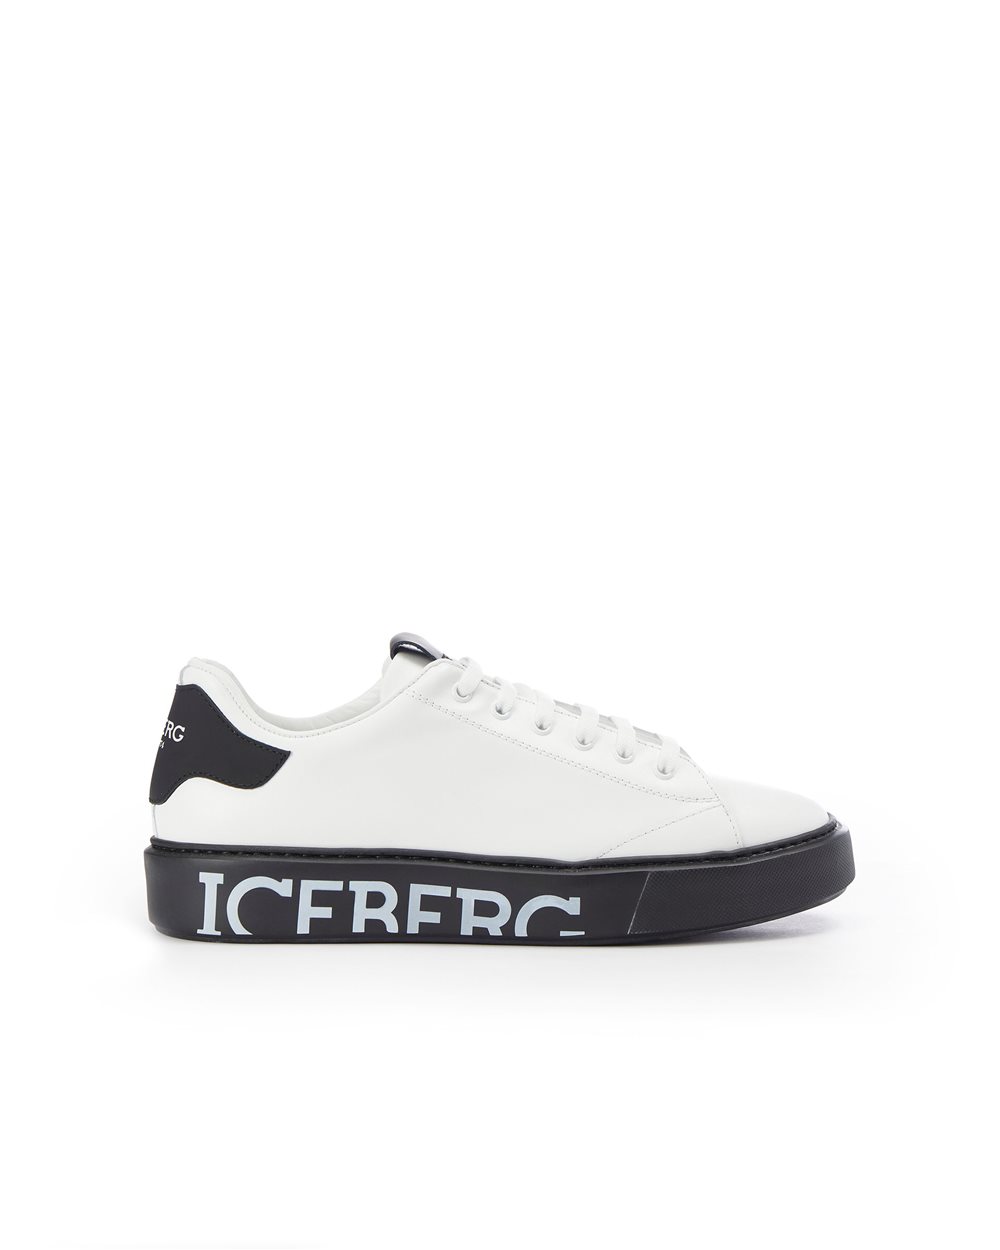 Leather Bozeman sneakers - ( PRIMO STEP US ) PROMO SALDI UP TO 30%  | Iceberg - Official Website